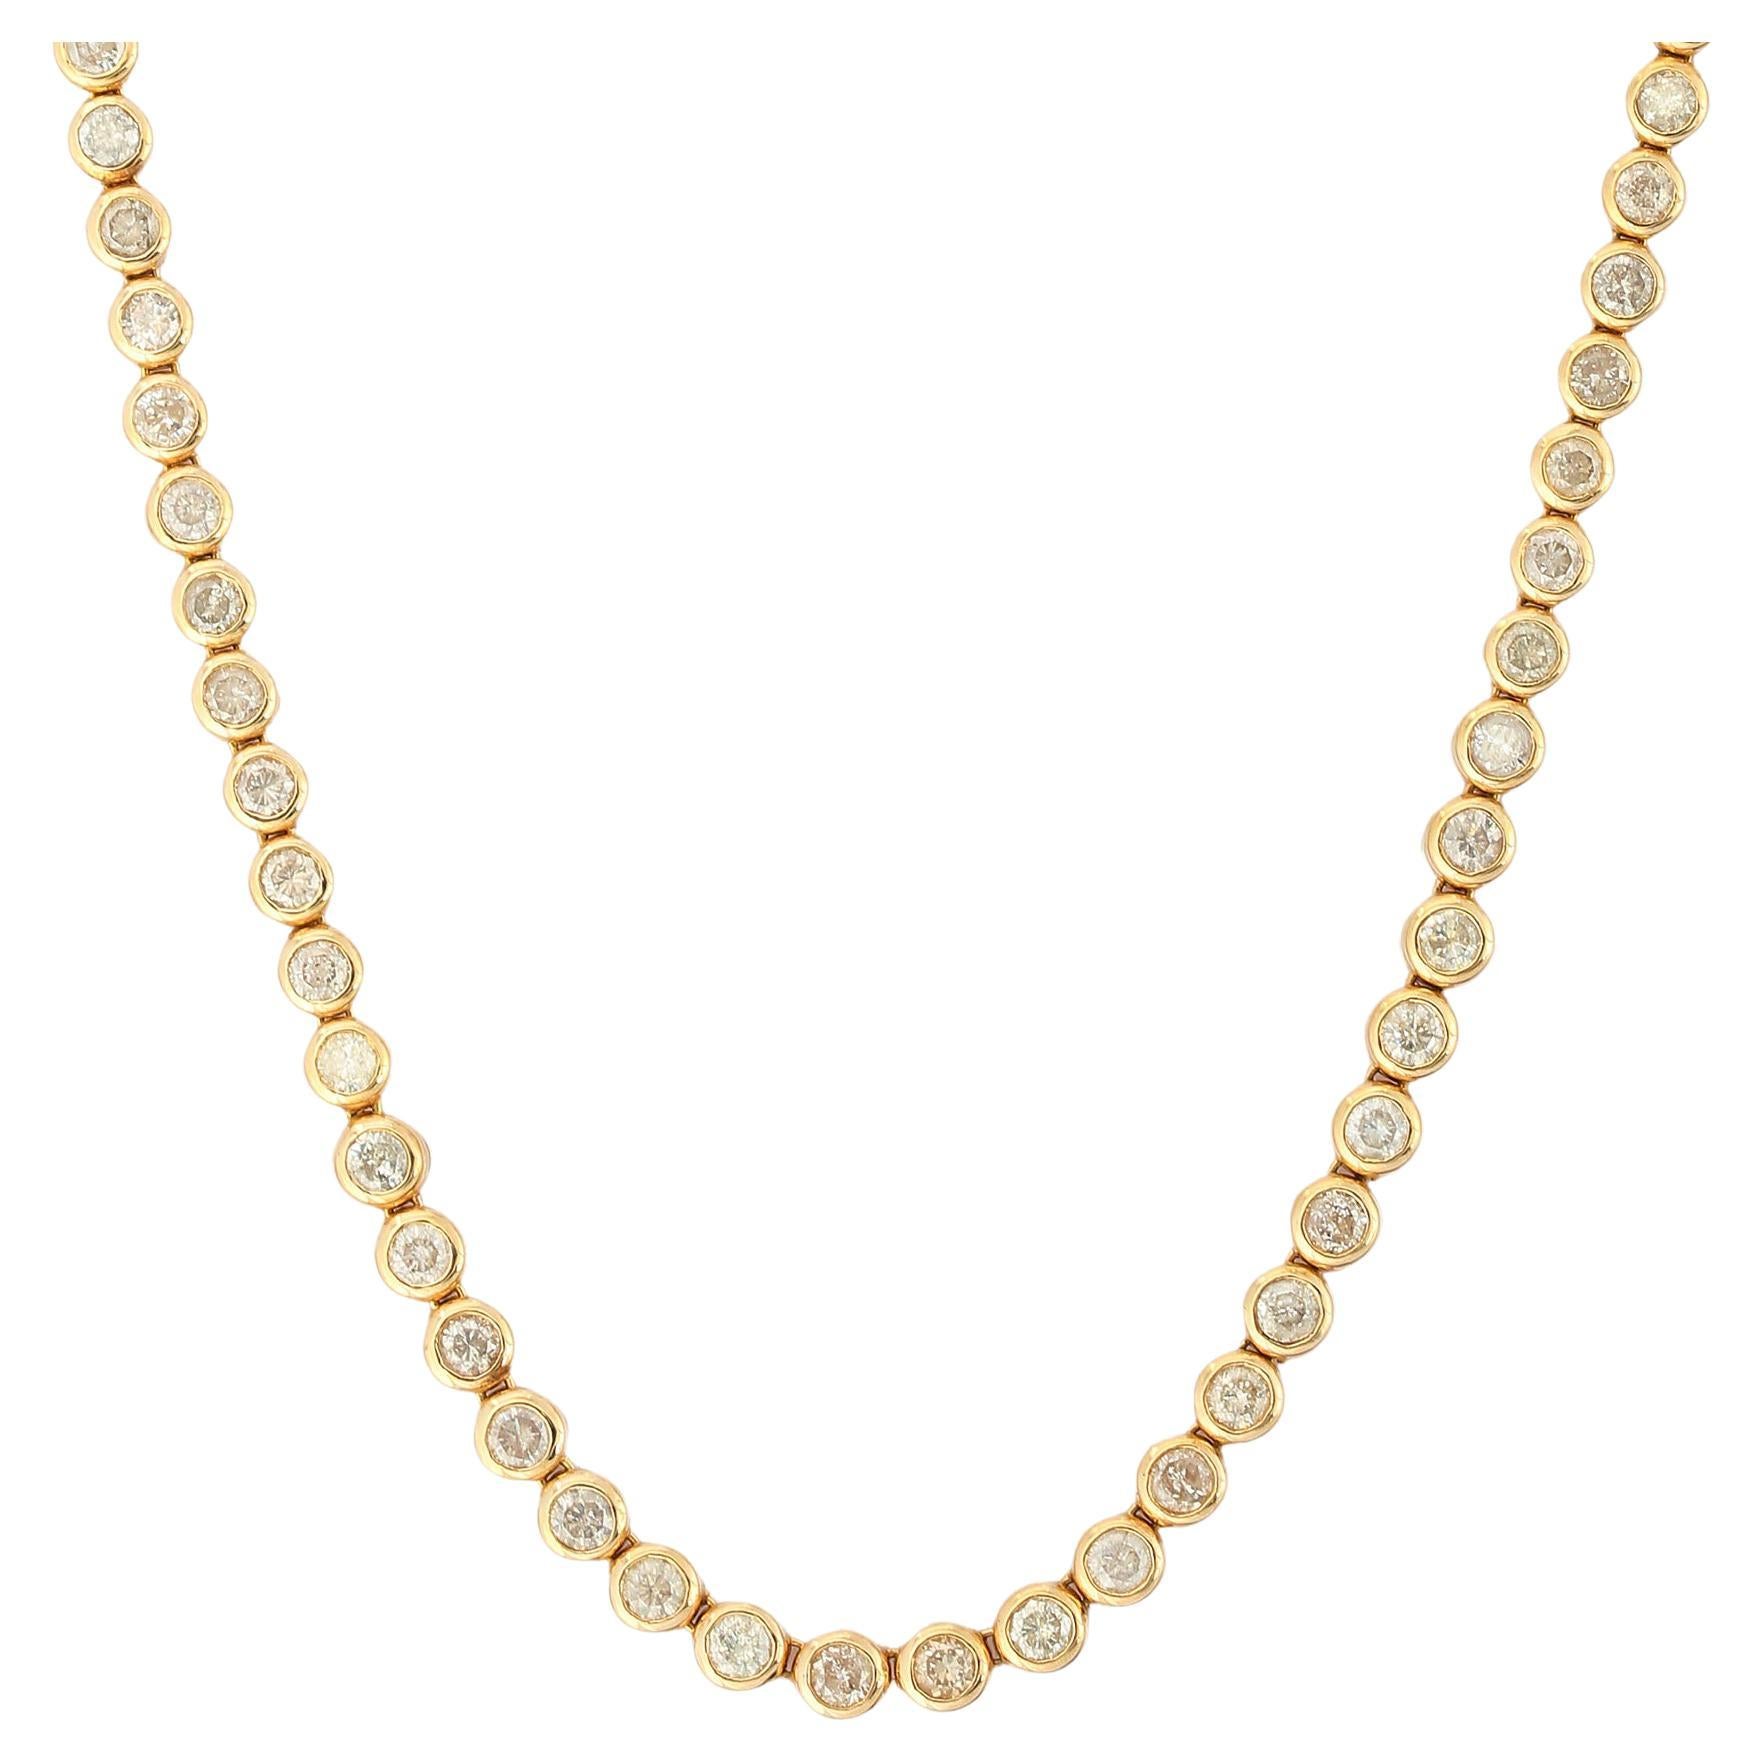 18K Yellow Gold 7.35 Carat Diamond Tennis Necklace Gift for Mom For Sale